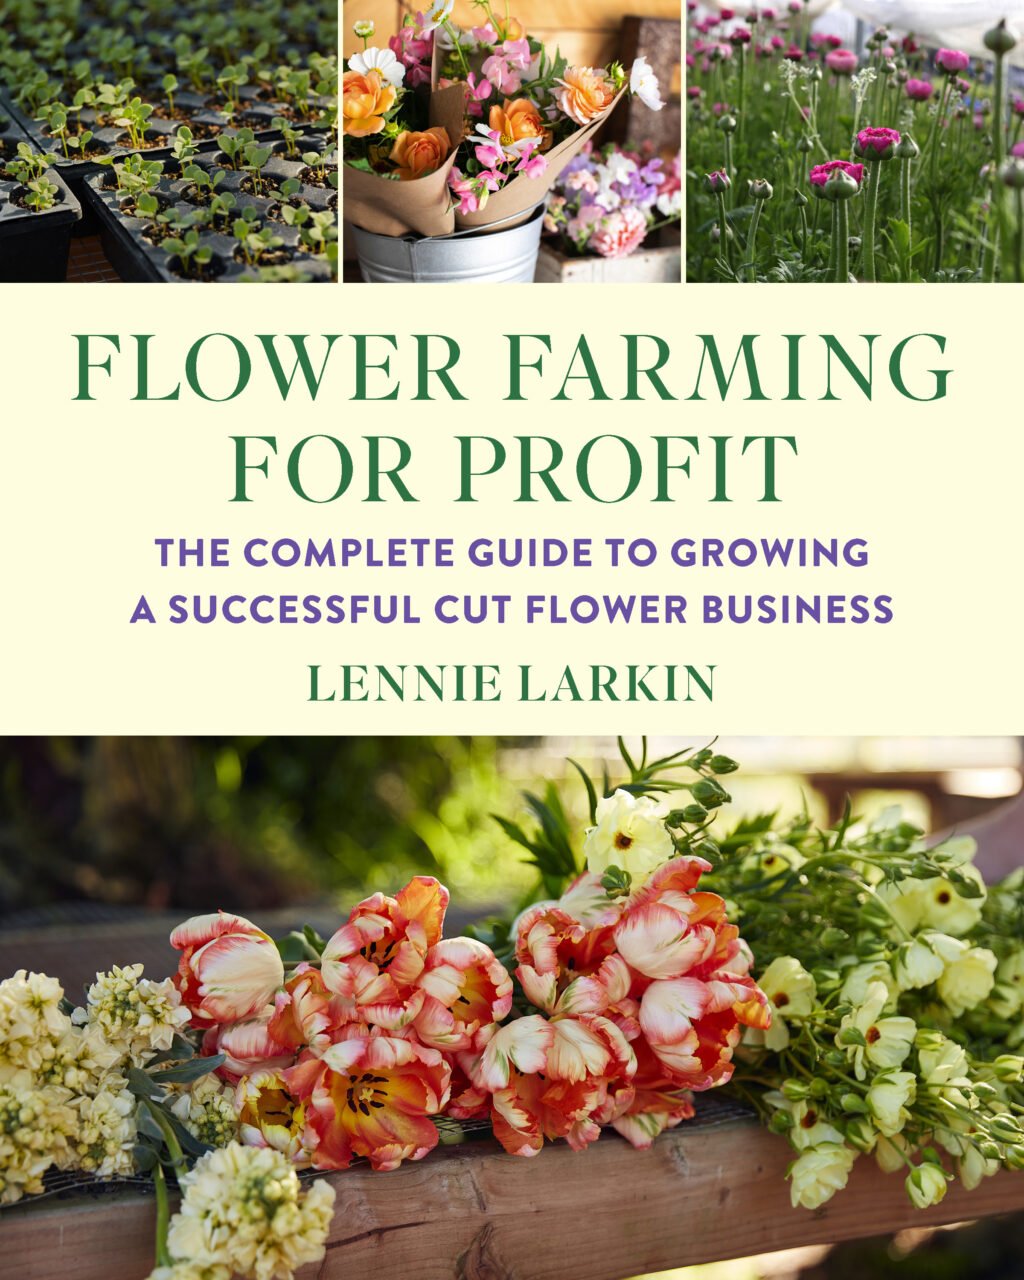 The Flower Farming for Profit cover